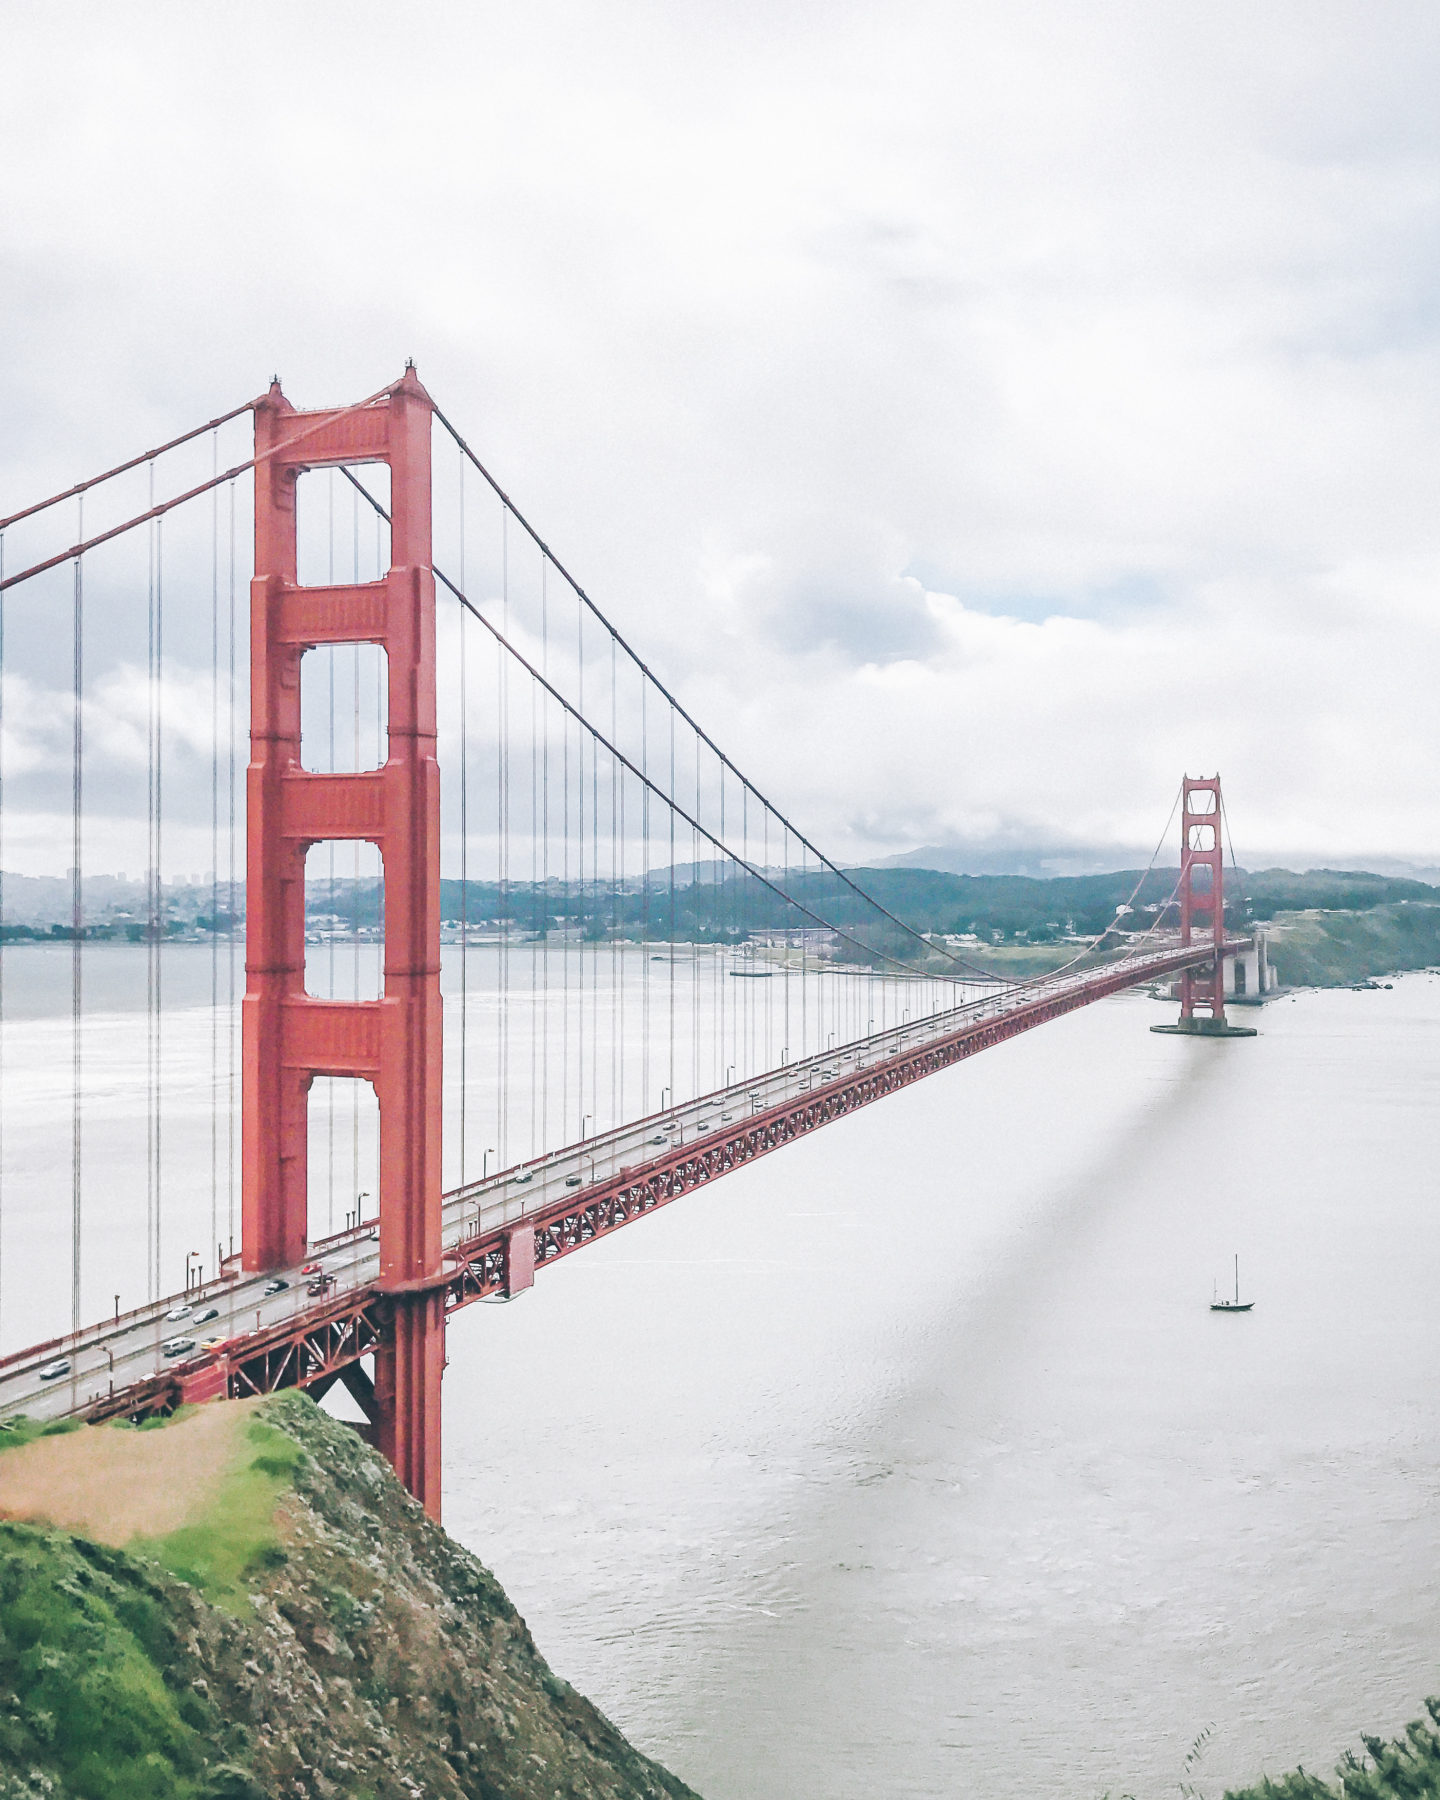 things to do in san francisco